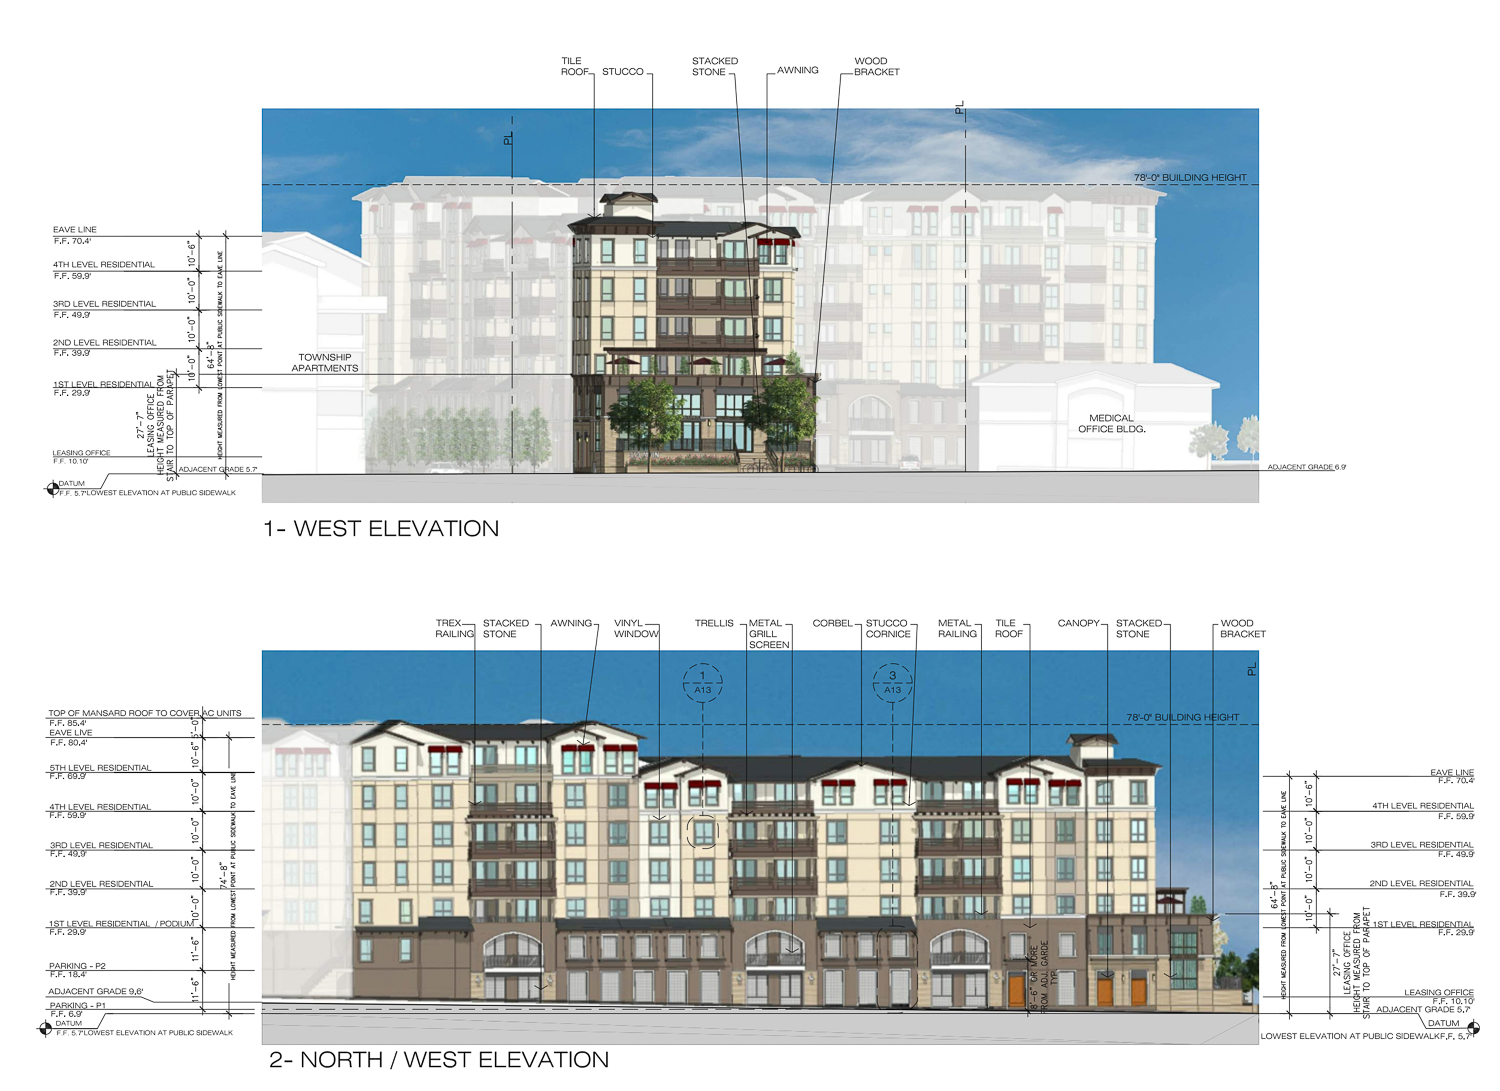 353 Main Street facade elevations, image by Withee Malcolm Architects